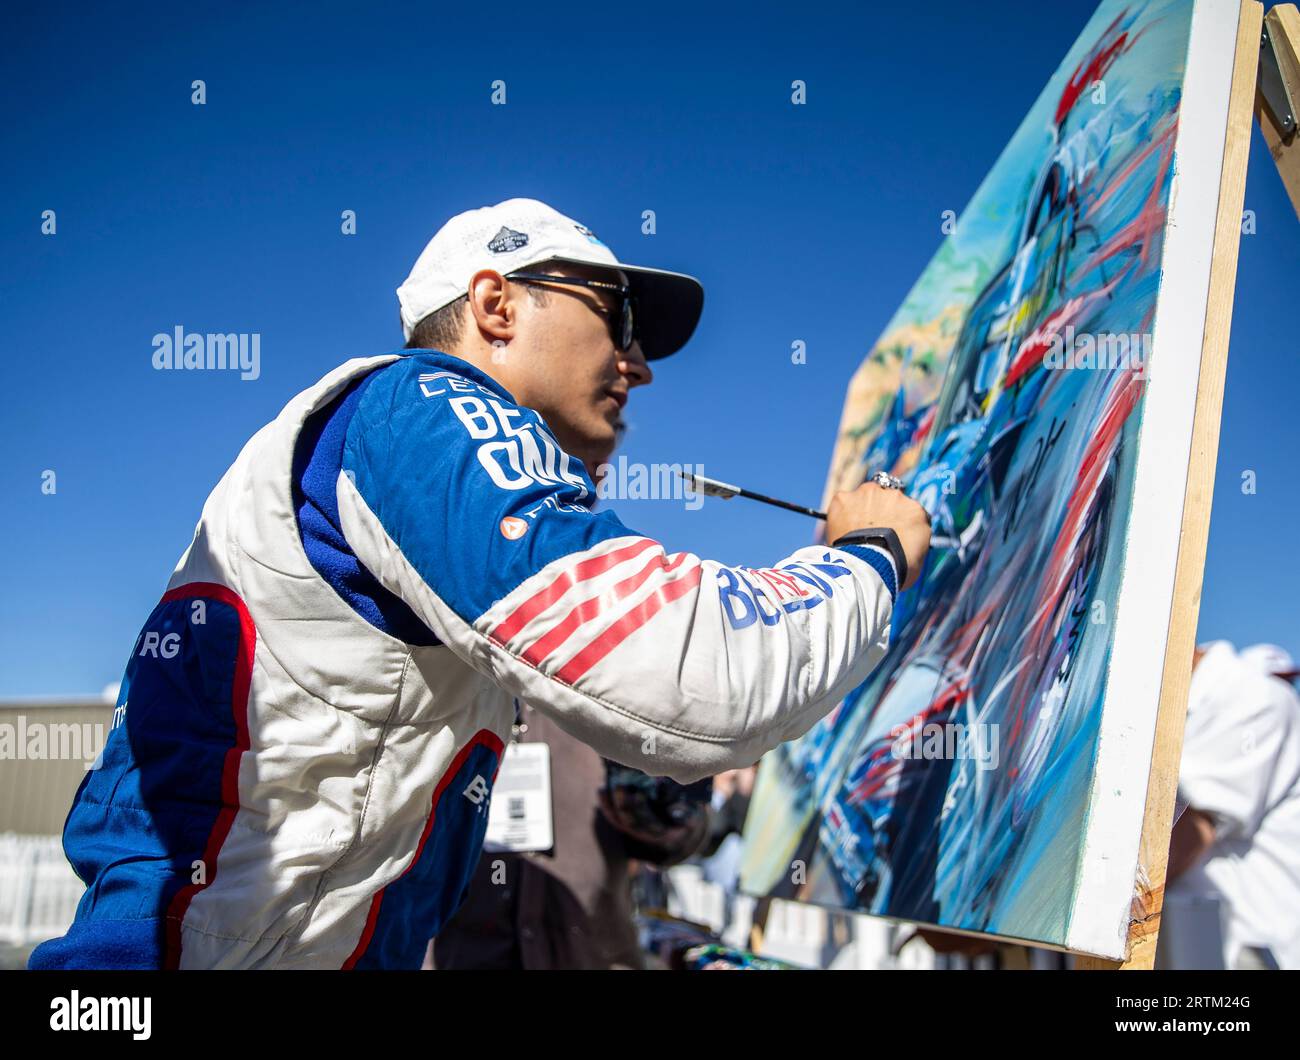 September 10 2023 Monterey, CA, U.S.A. Driver Ãlex Palou (10) sign an autograph painting after the Firestone Grand Prix of Monterey NTT Indycar Championship. Alex Palou takes third place and was crowned the NTT Indycar champion at Weathertech Raceway Laguna Seca Monterey, CA Thurman James/CSM (Credit Image: © Thurman James/Cal Sport Media) Stock Photo